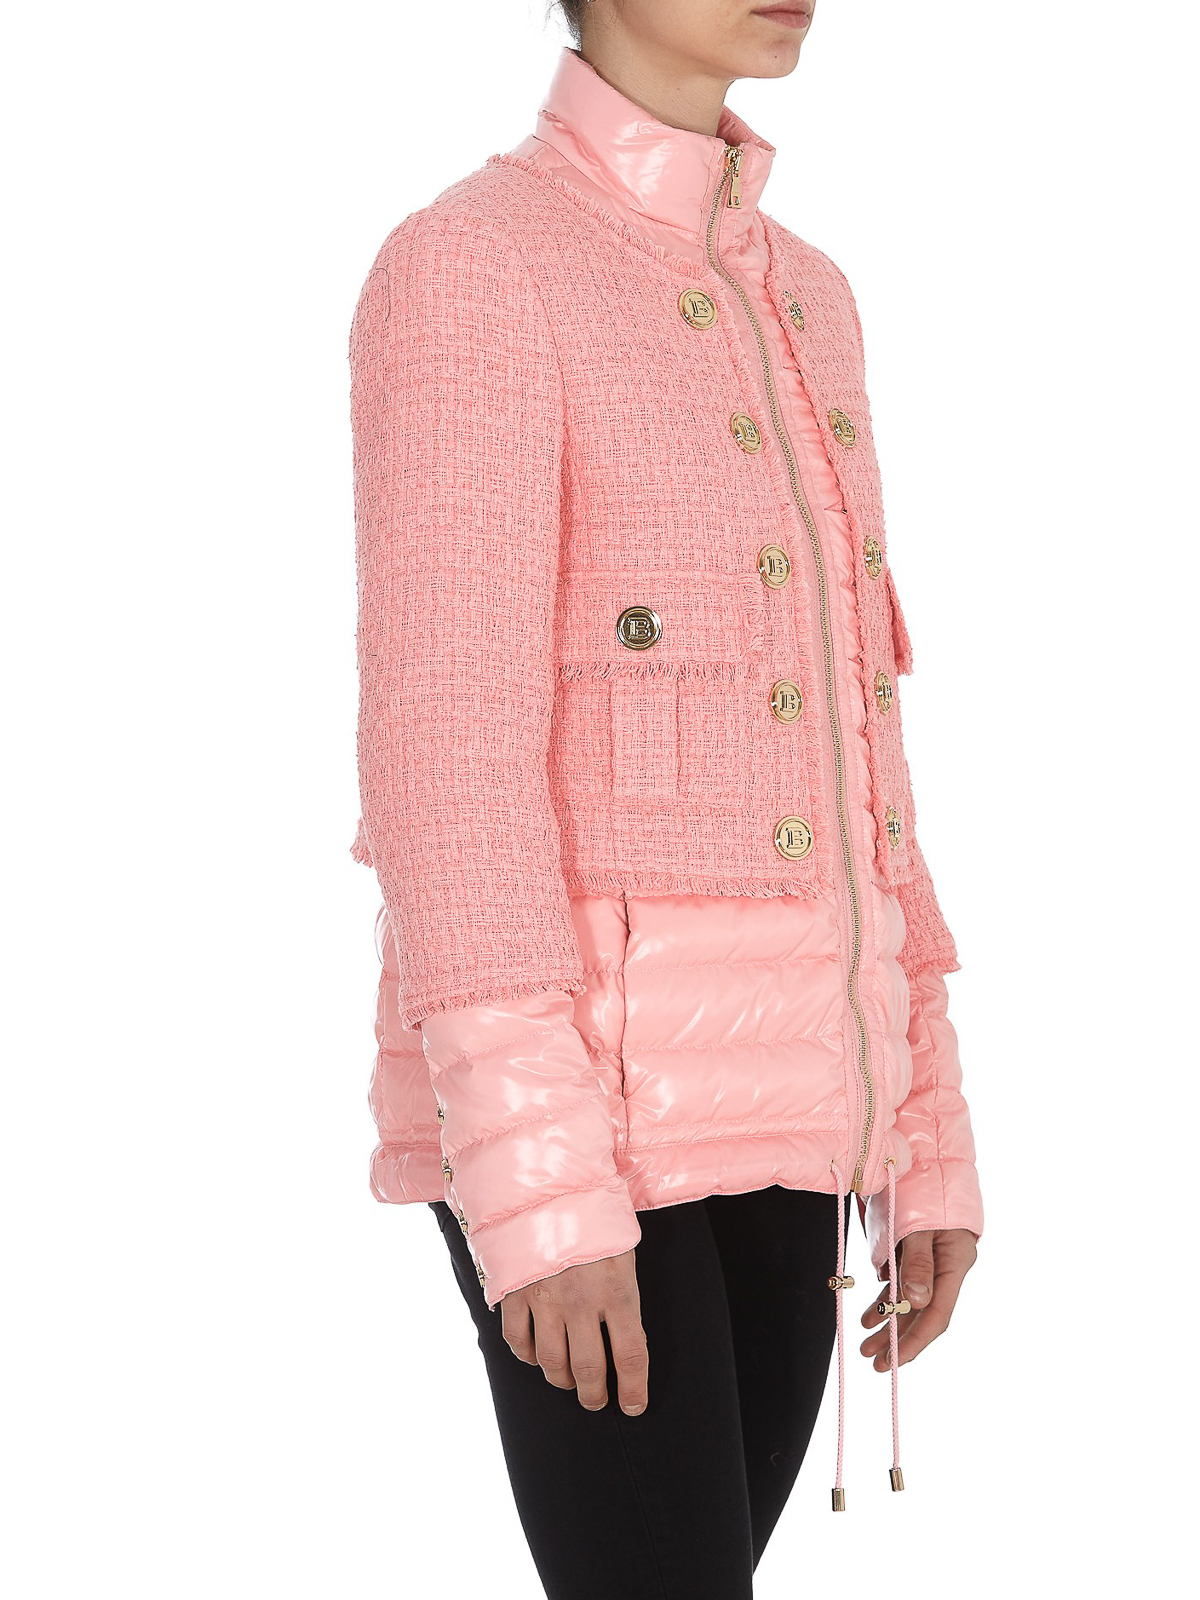 Geliefde plek Omleiding Padded jackets Balmain - Tweed and quilted fabric puffer jacket -  VF19396169X4KH